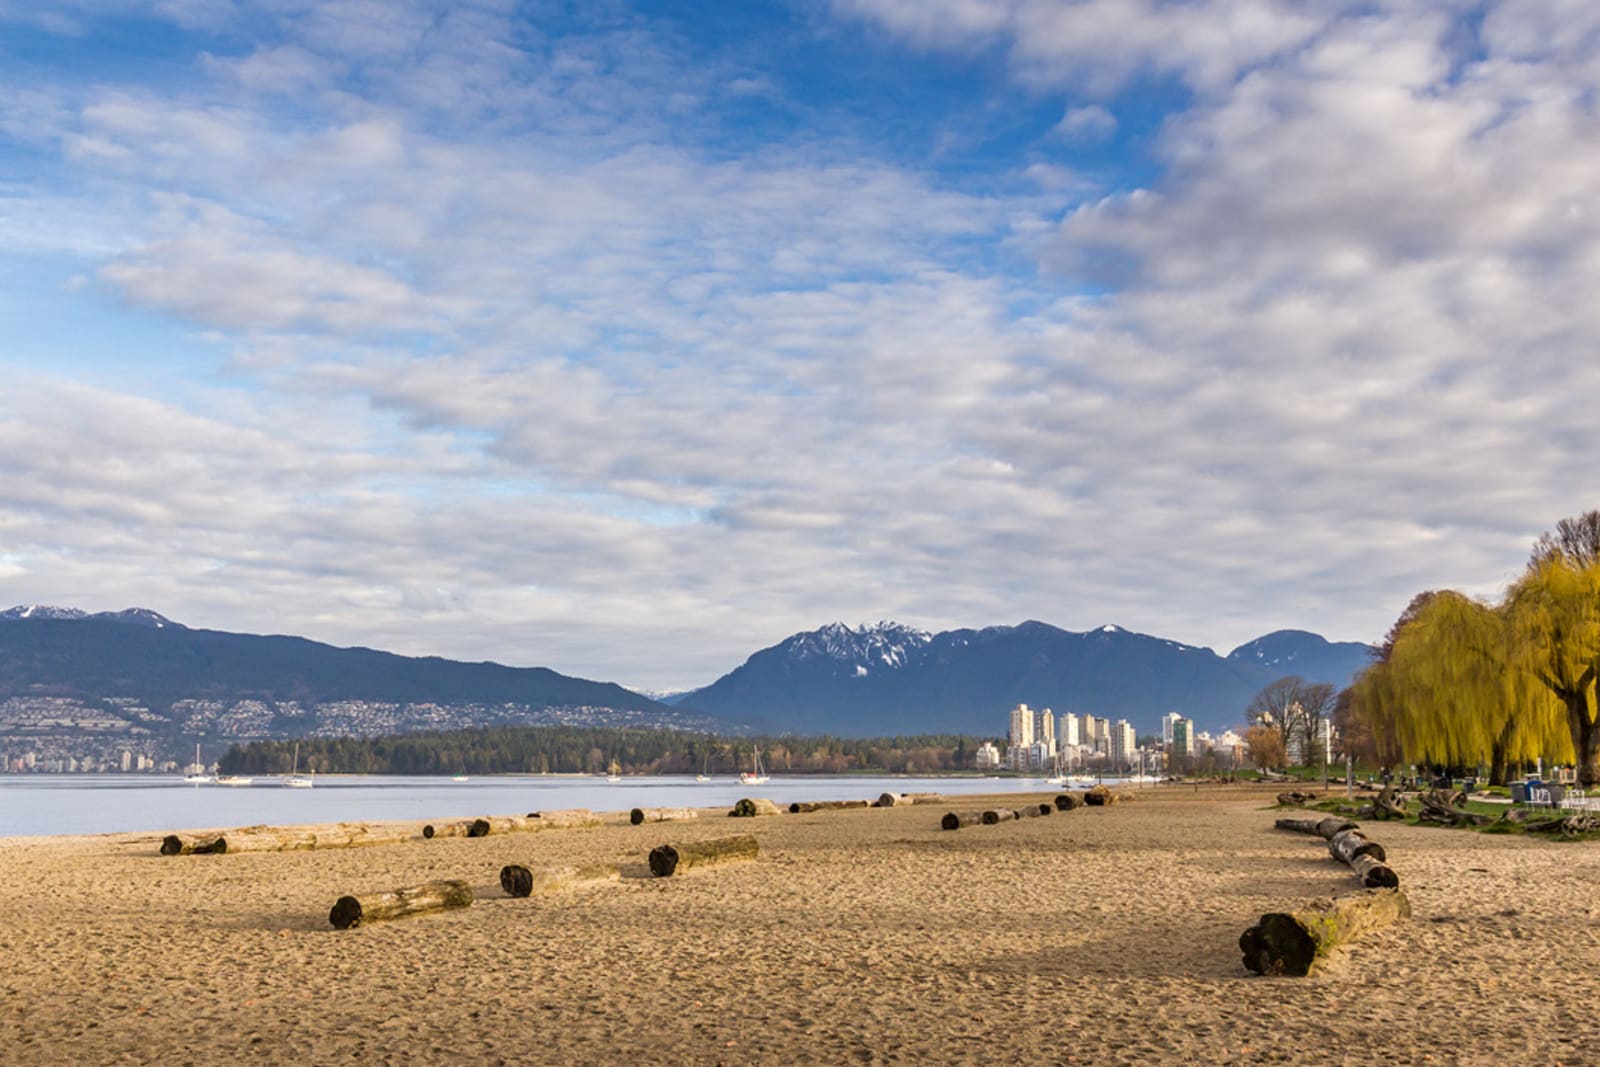 Start your morning in Vancouver by going for a walk at Kitsilano Beach